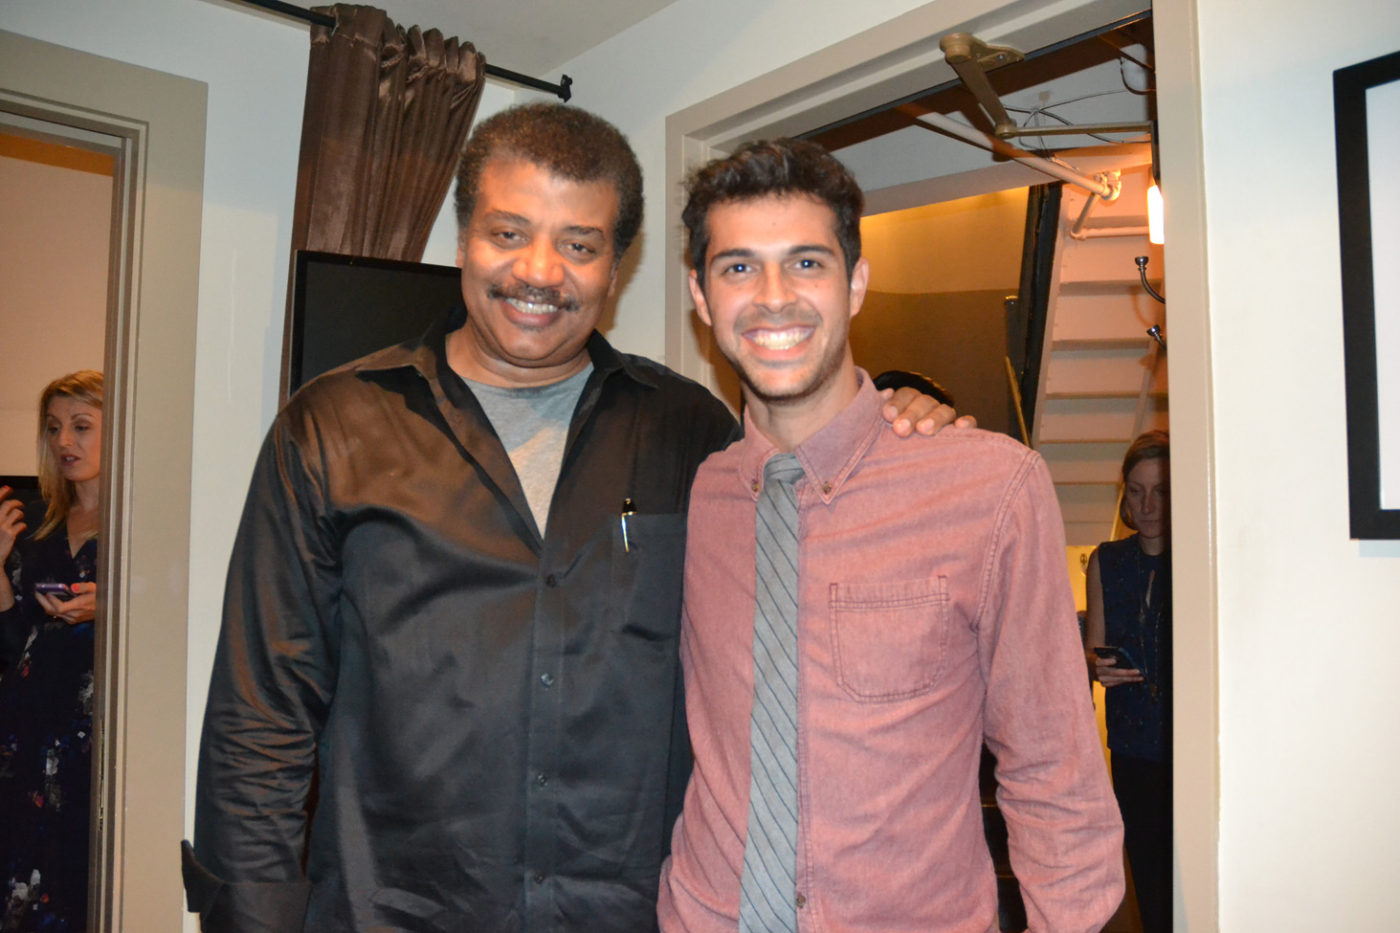 Stacey Severn's photo of Neil deGrasse Tyson and Ian Mullen.